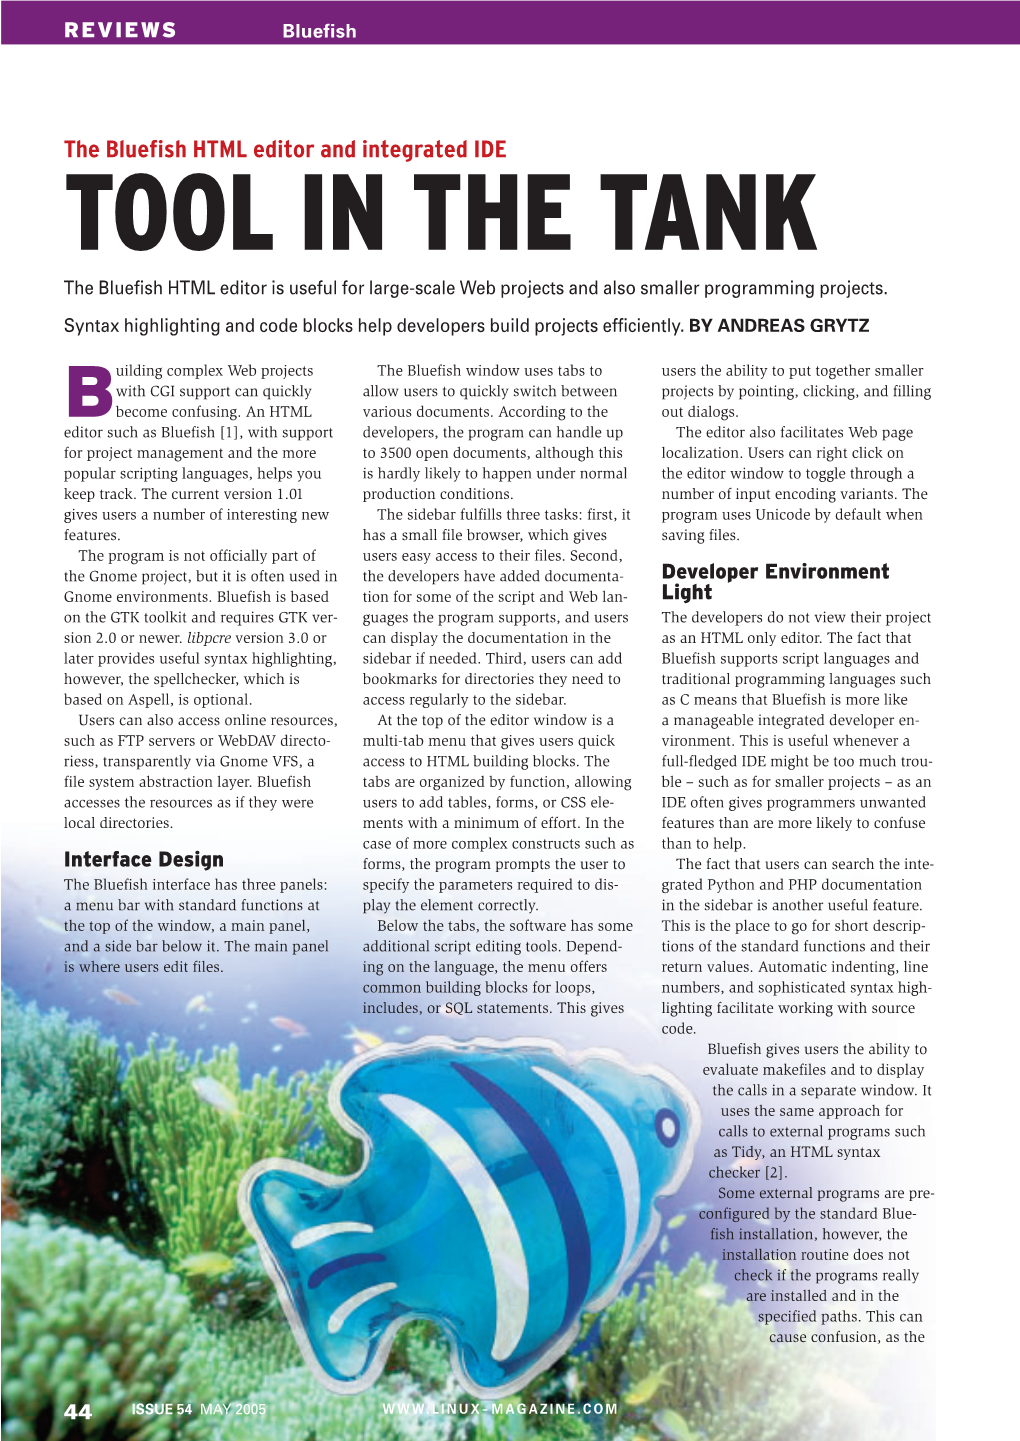 TOOL in the TANK the Bluefish HTML Editor Is Useful for Large-Scale Web Projects and Also Smaller Programming Projects